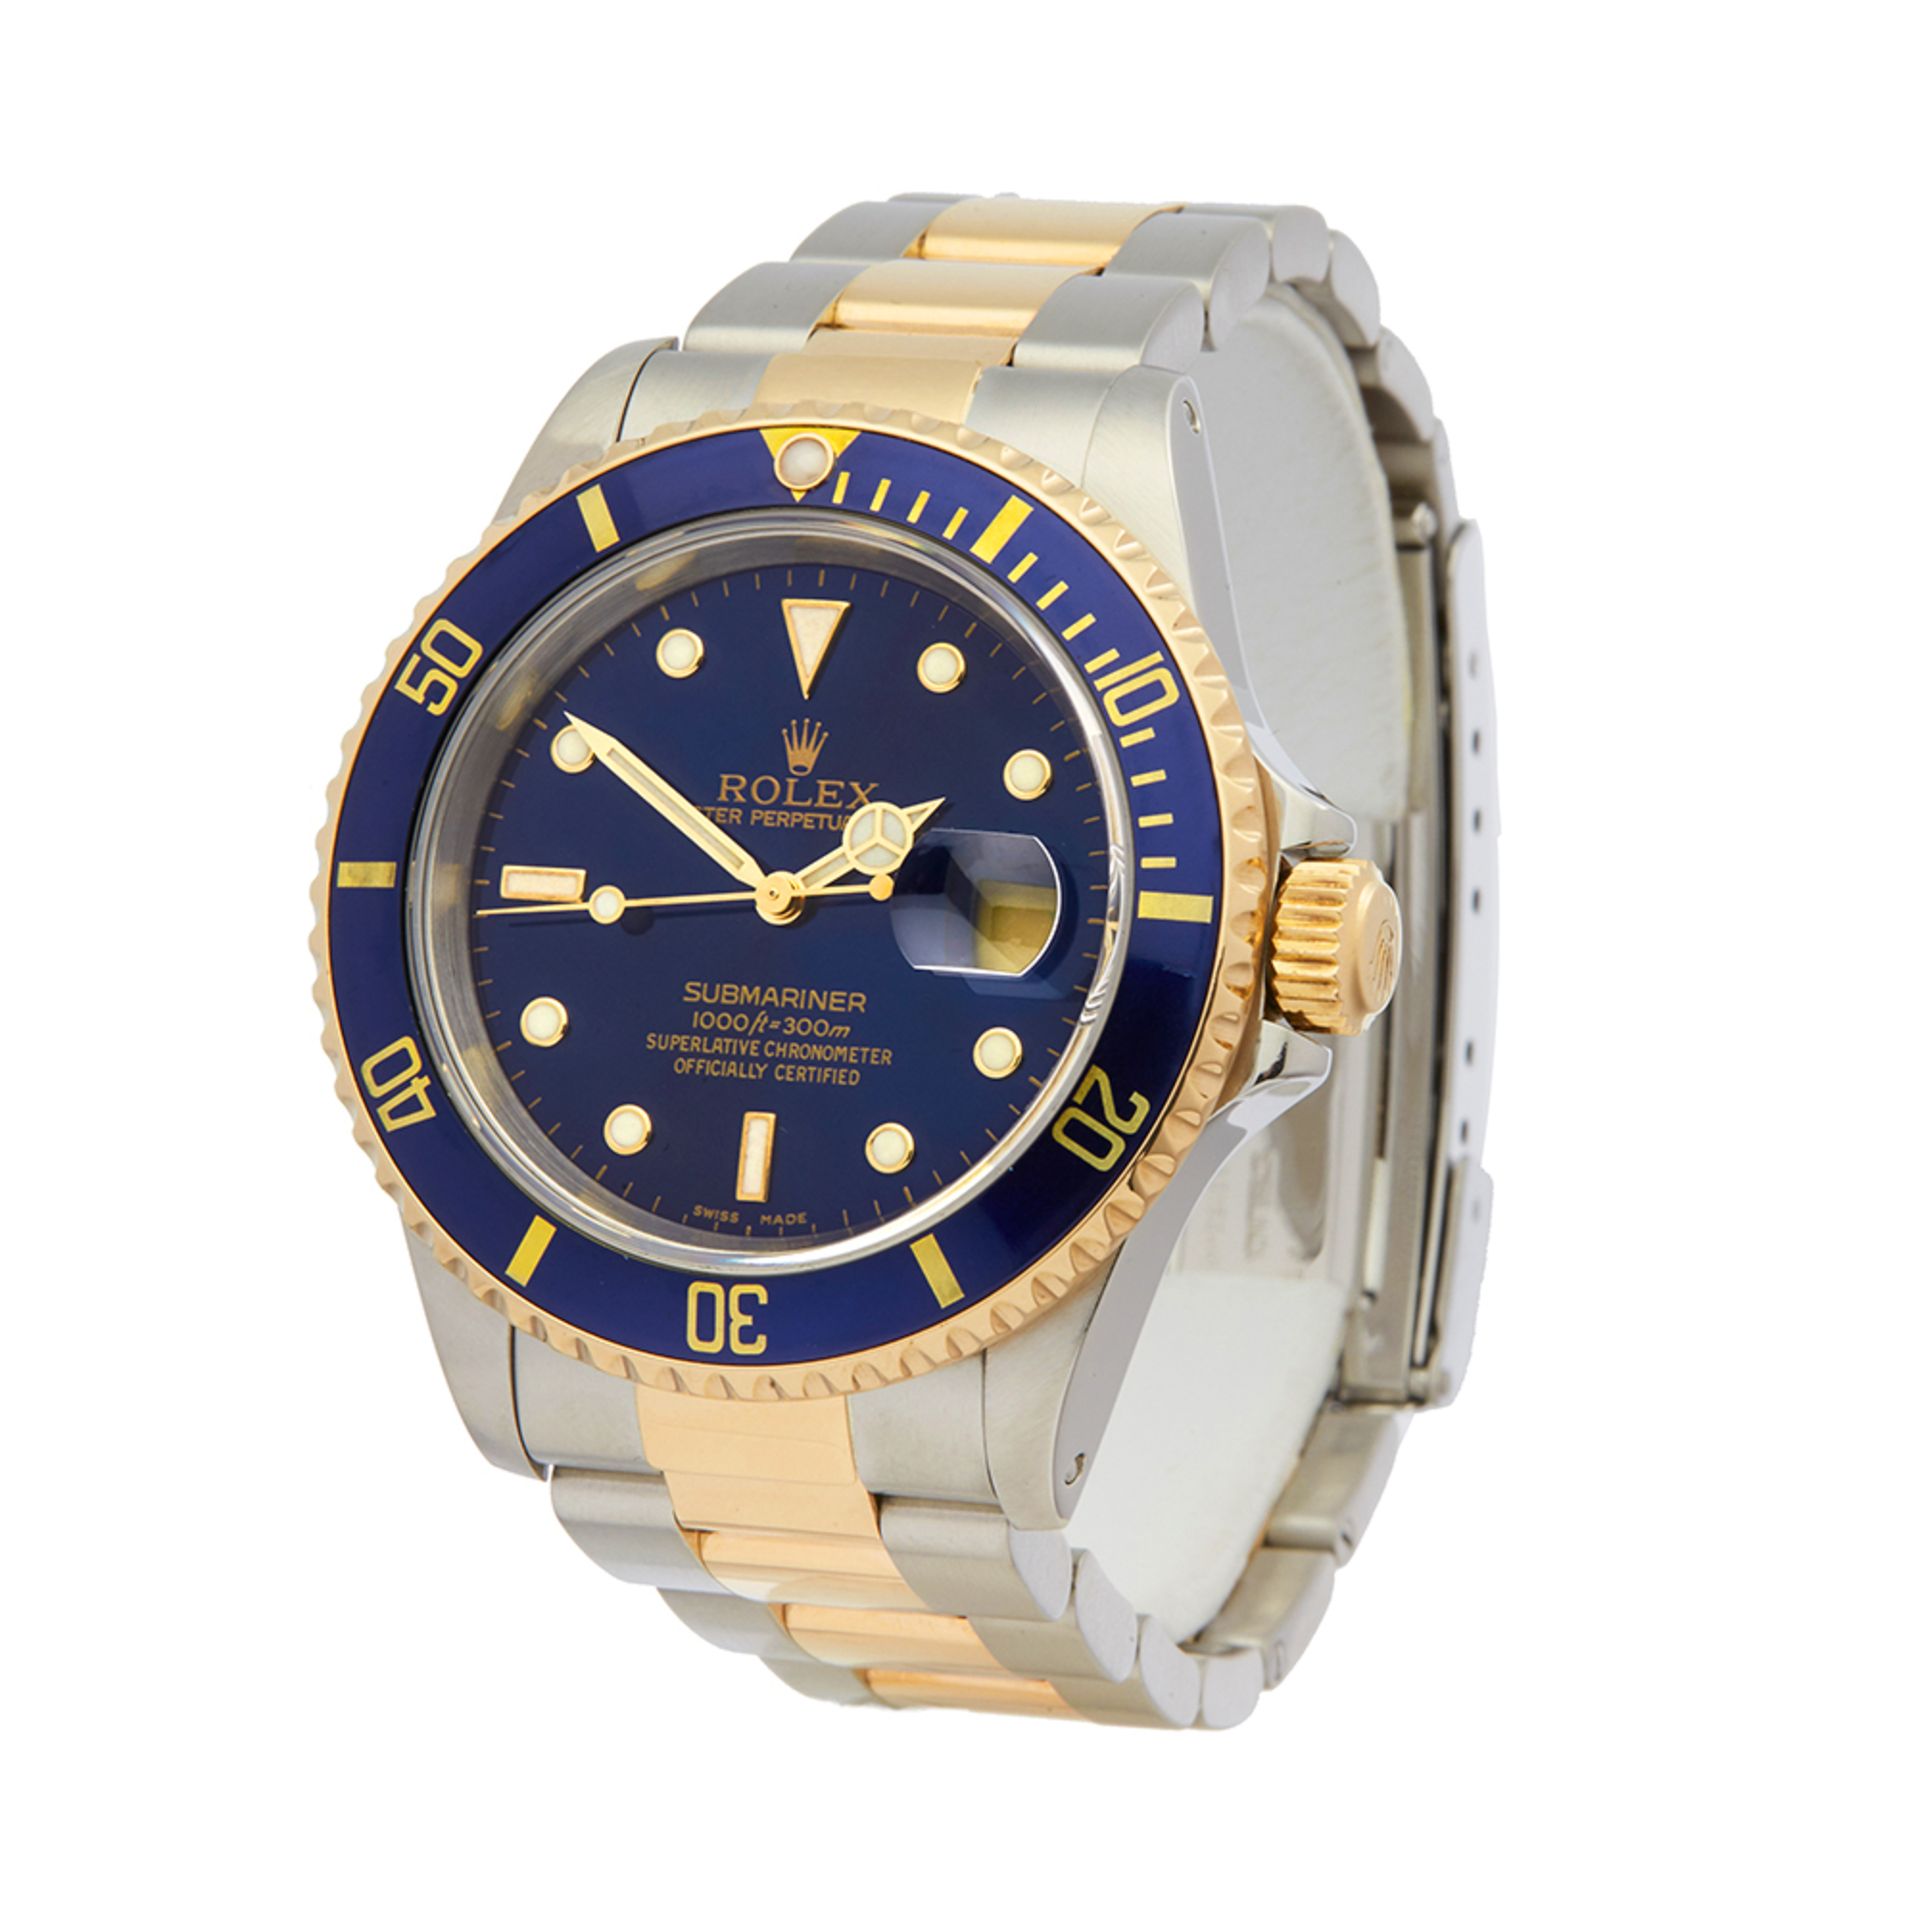 1999 Rolex Submariner Date 18k Stainless Steel & Yellow Gold - 16613LB